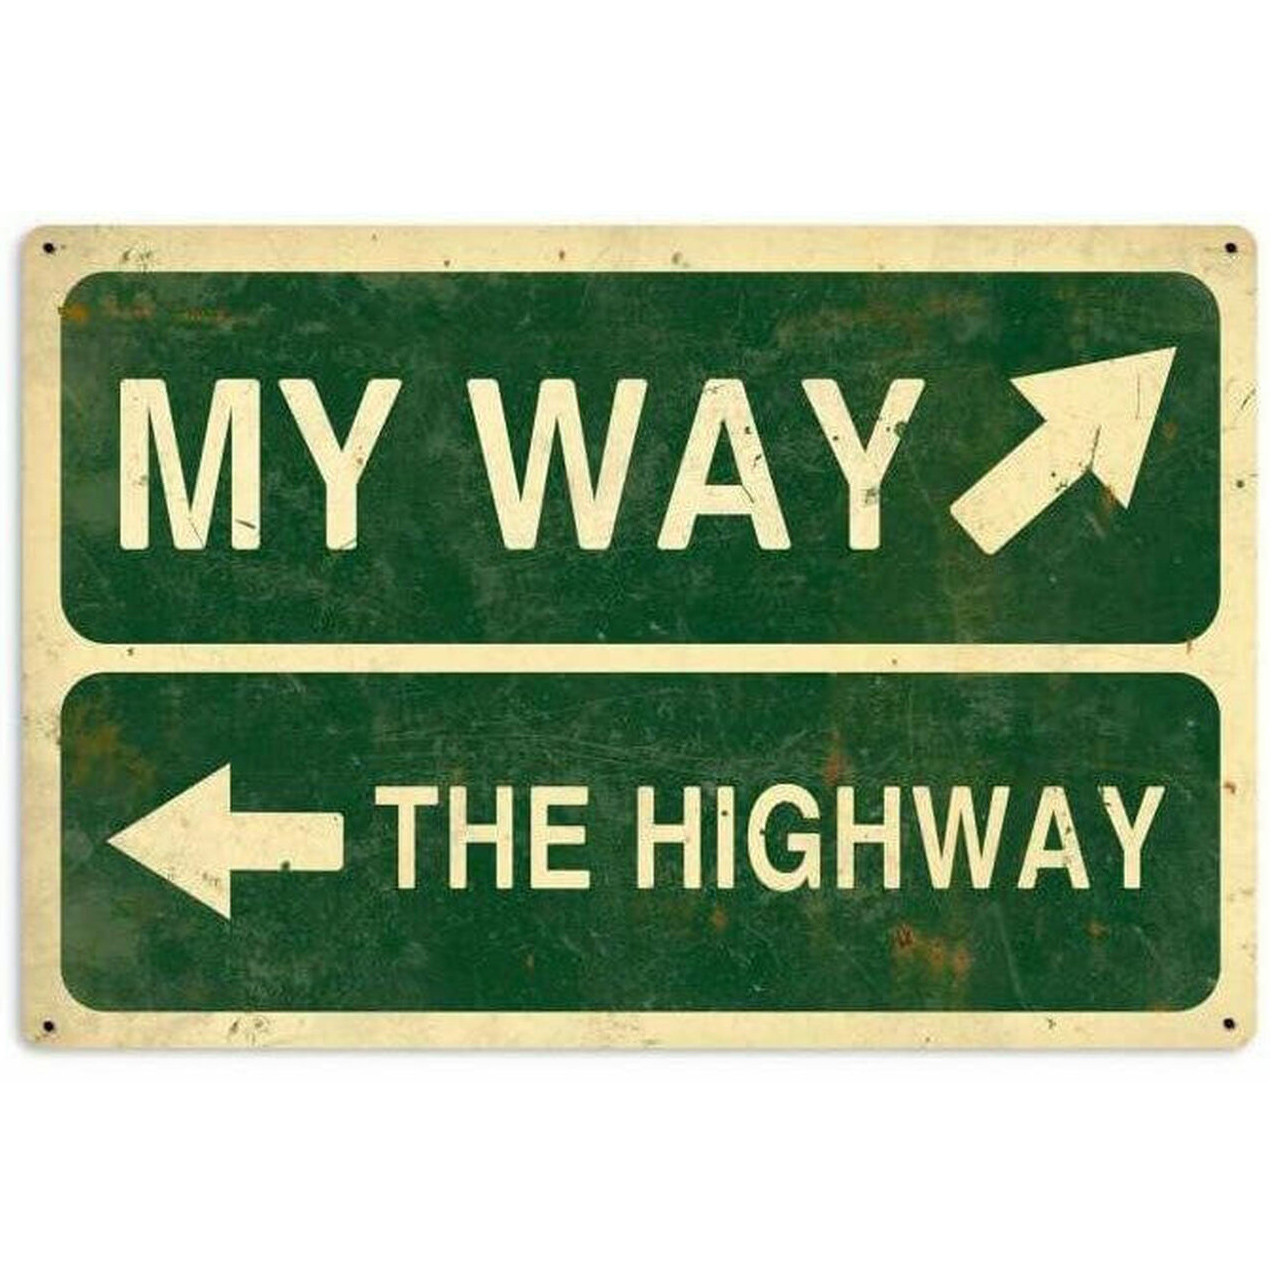 My Way Highway Retro Metal Sign 36 x 24 Inches